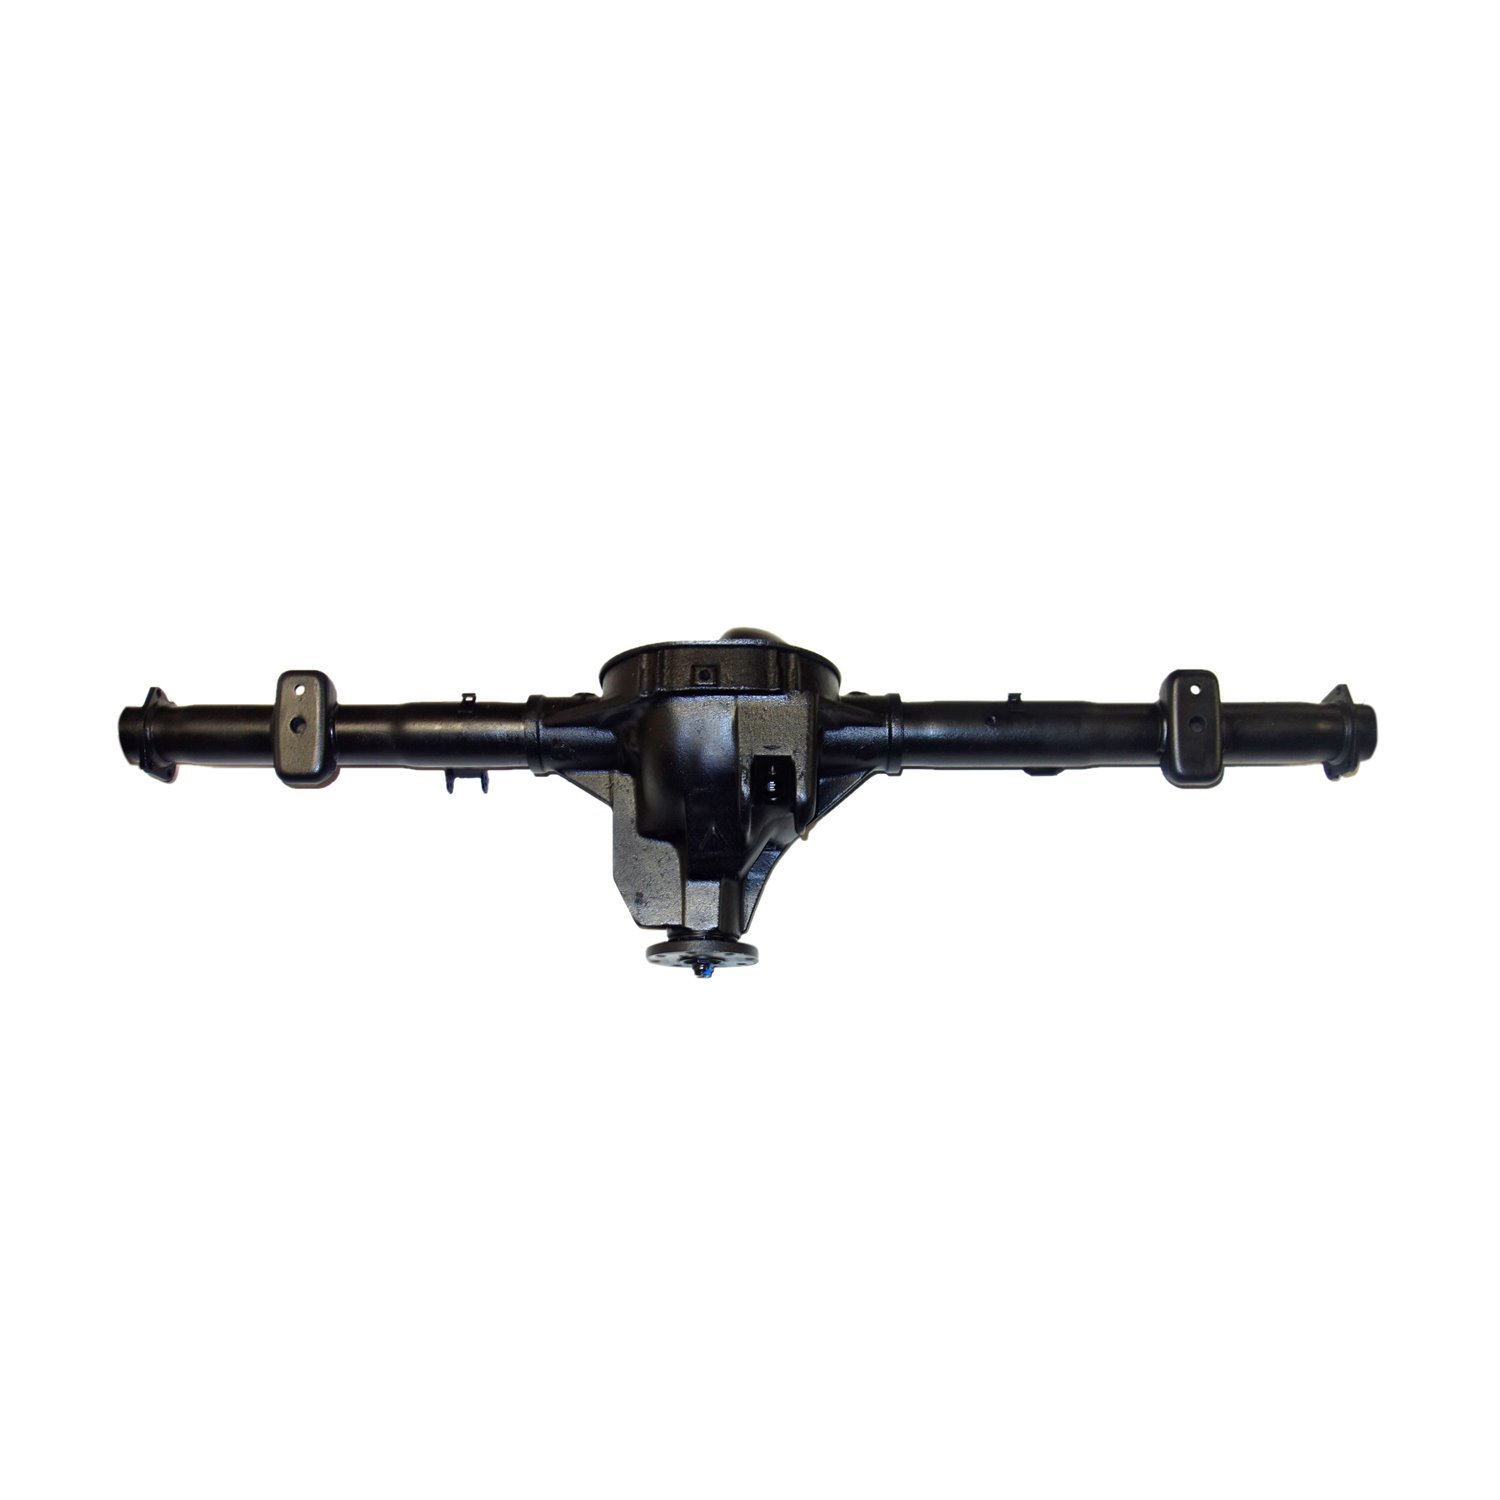 Remanufactured Complete Axle Assembly for Ford 8.8" 94-97 Ford Ranger 3.27, 9" Brakes